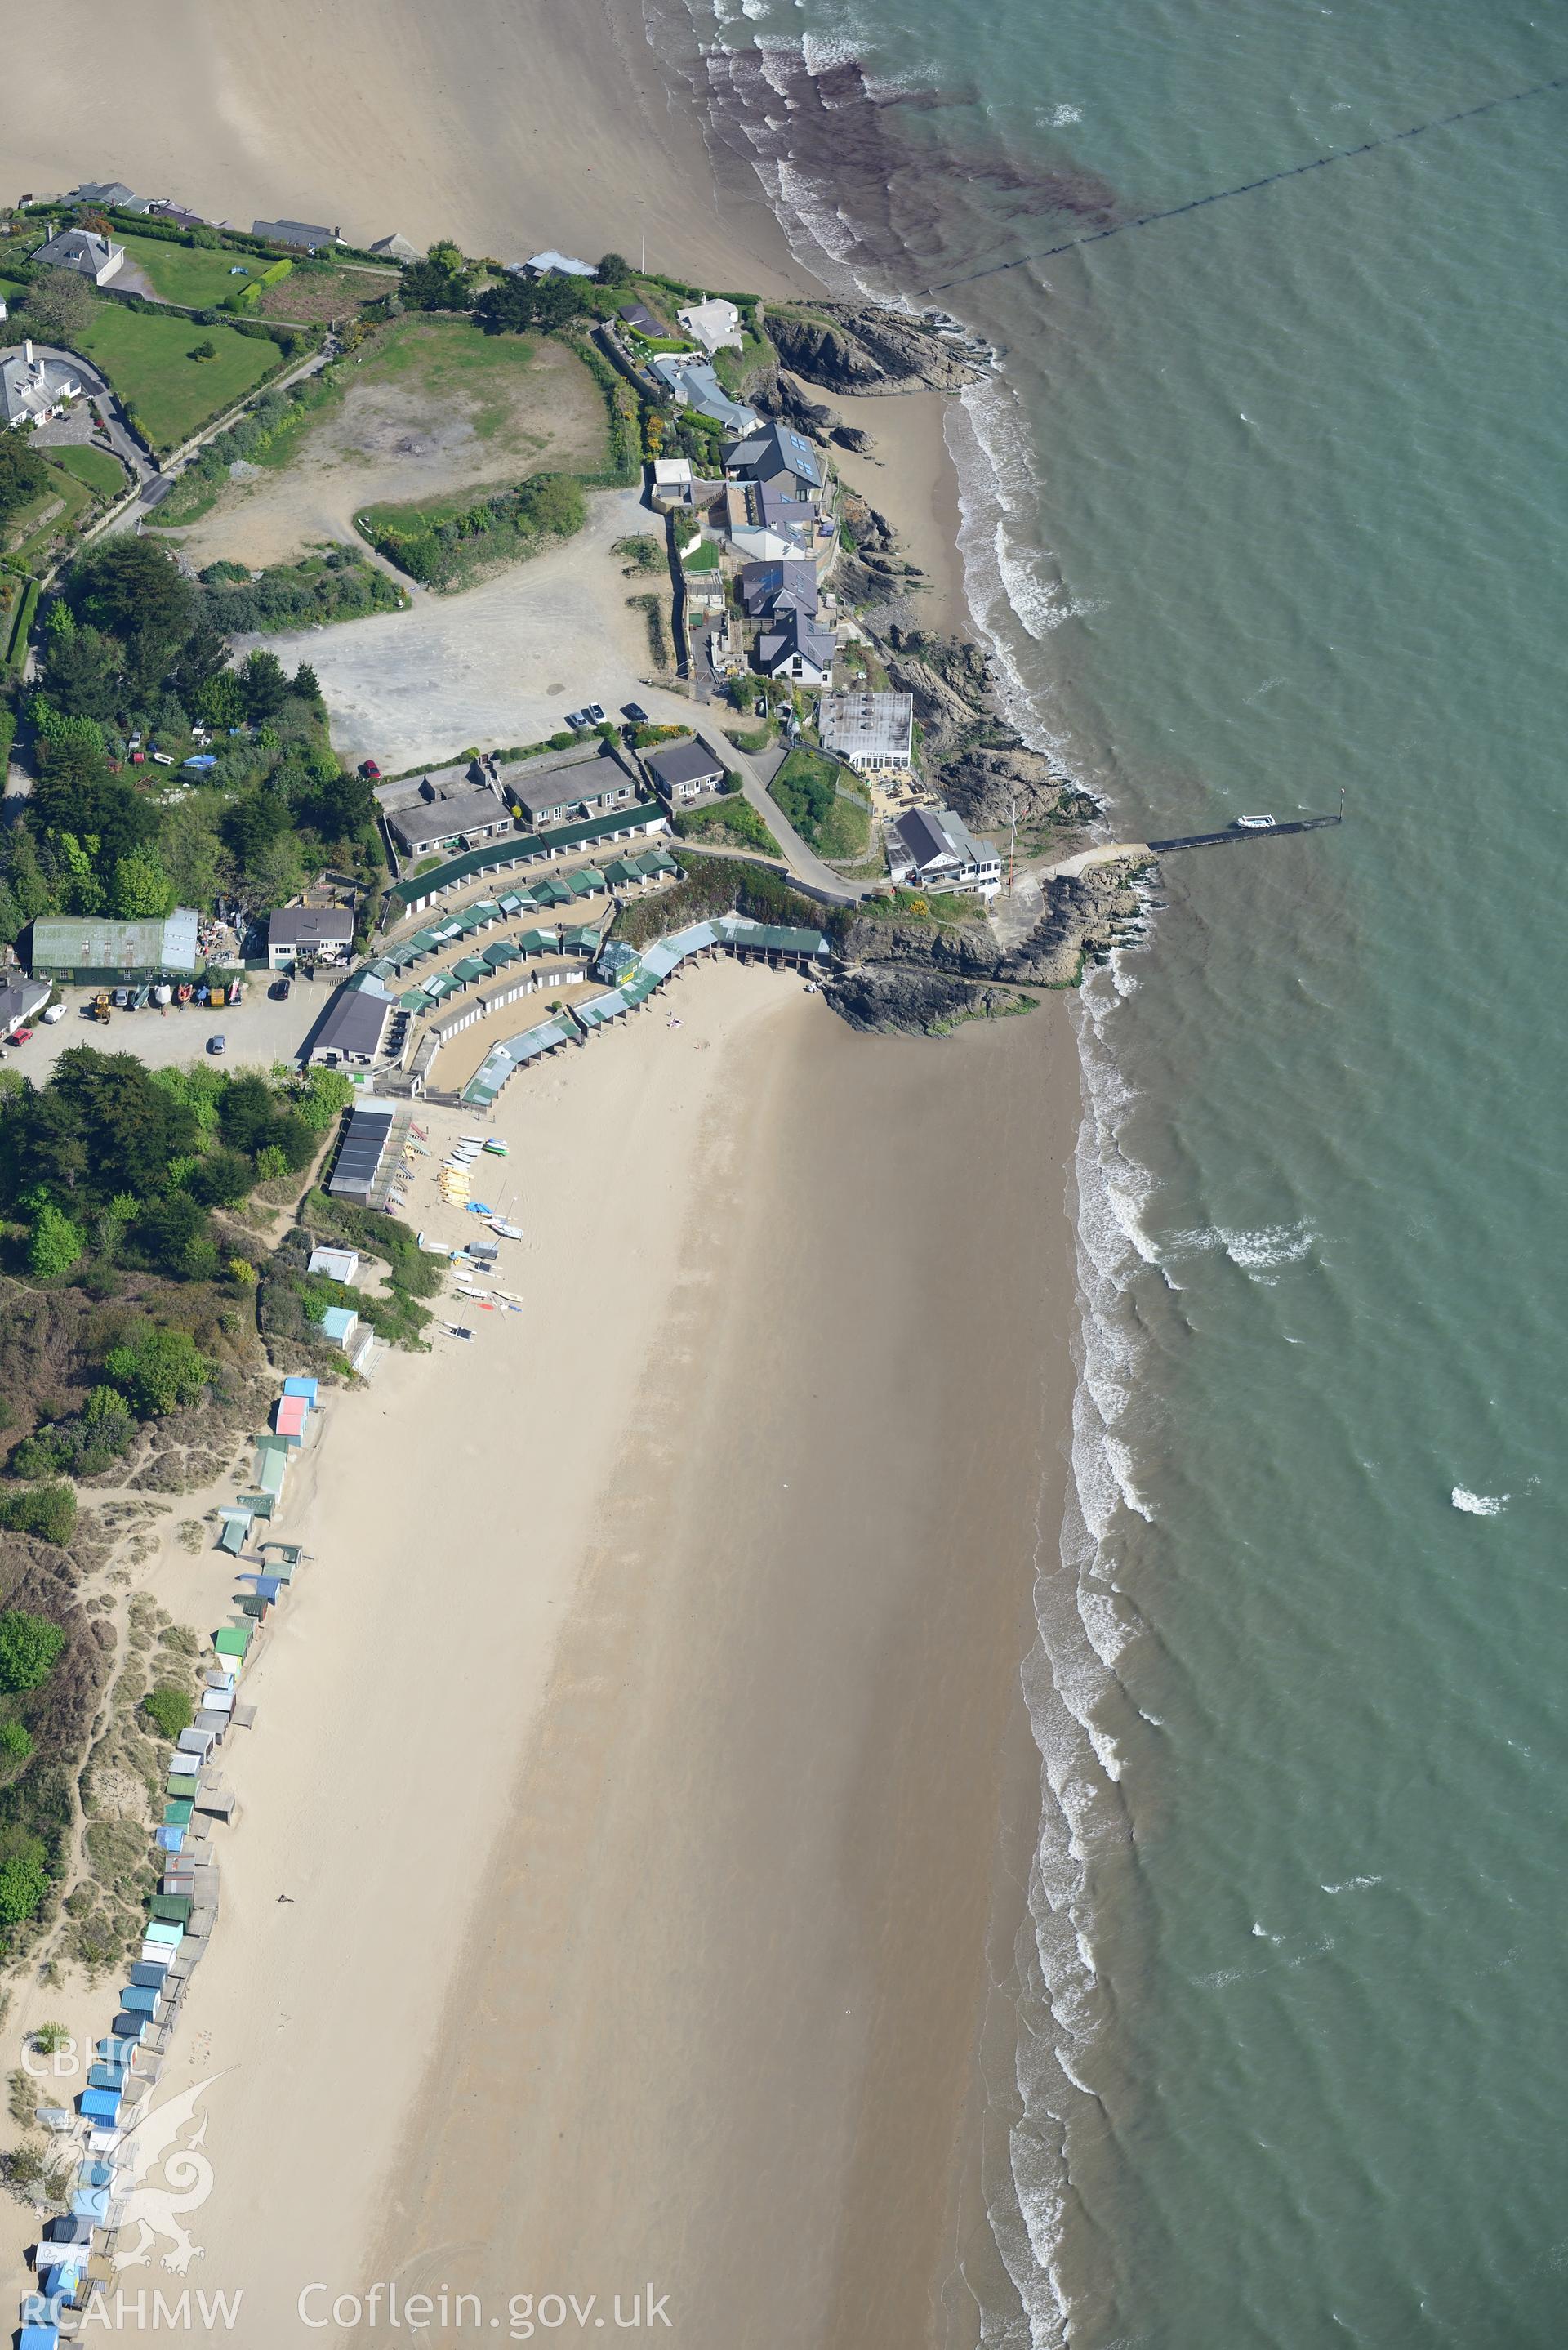 Aerial photography of Abersoch taken on 3rd May 2017.  Baseline aerial reconnaissance survey for the CHERISH Project. ? Crown: CHERISH PROJECT 2017. Produced with EU funds through the Ireland Wales Co-operation Programme 2014-2020. All material made free